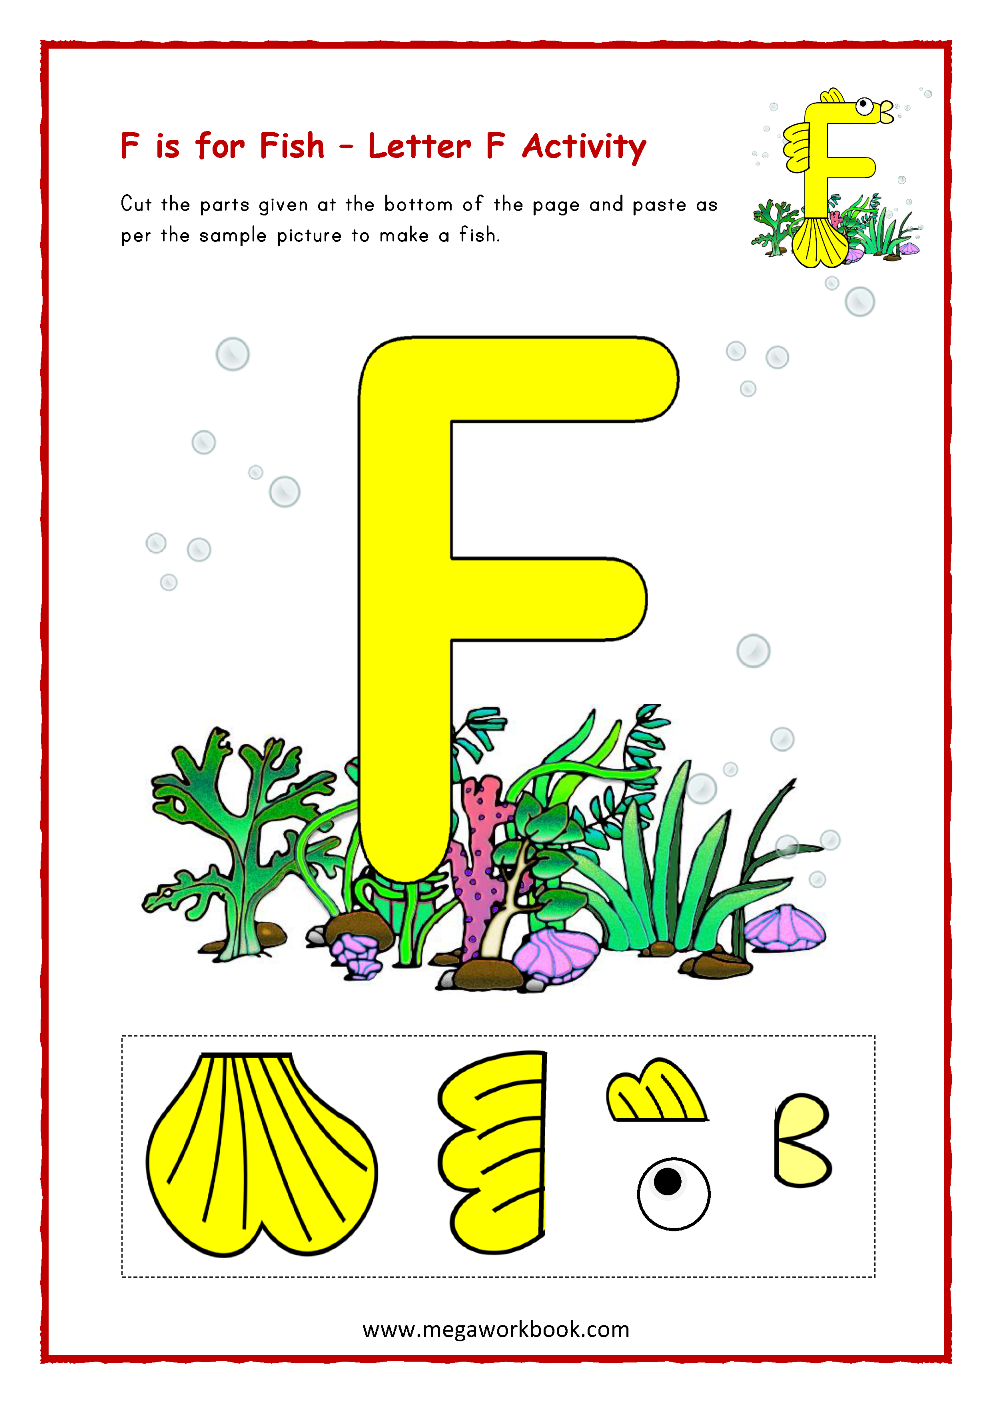 letter-f-activities-letter-f-worksheets-letter-f-activities-for